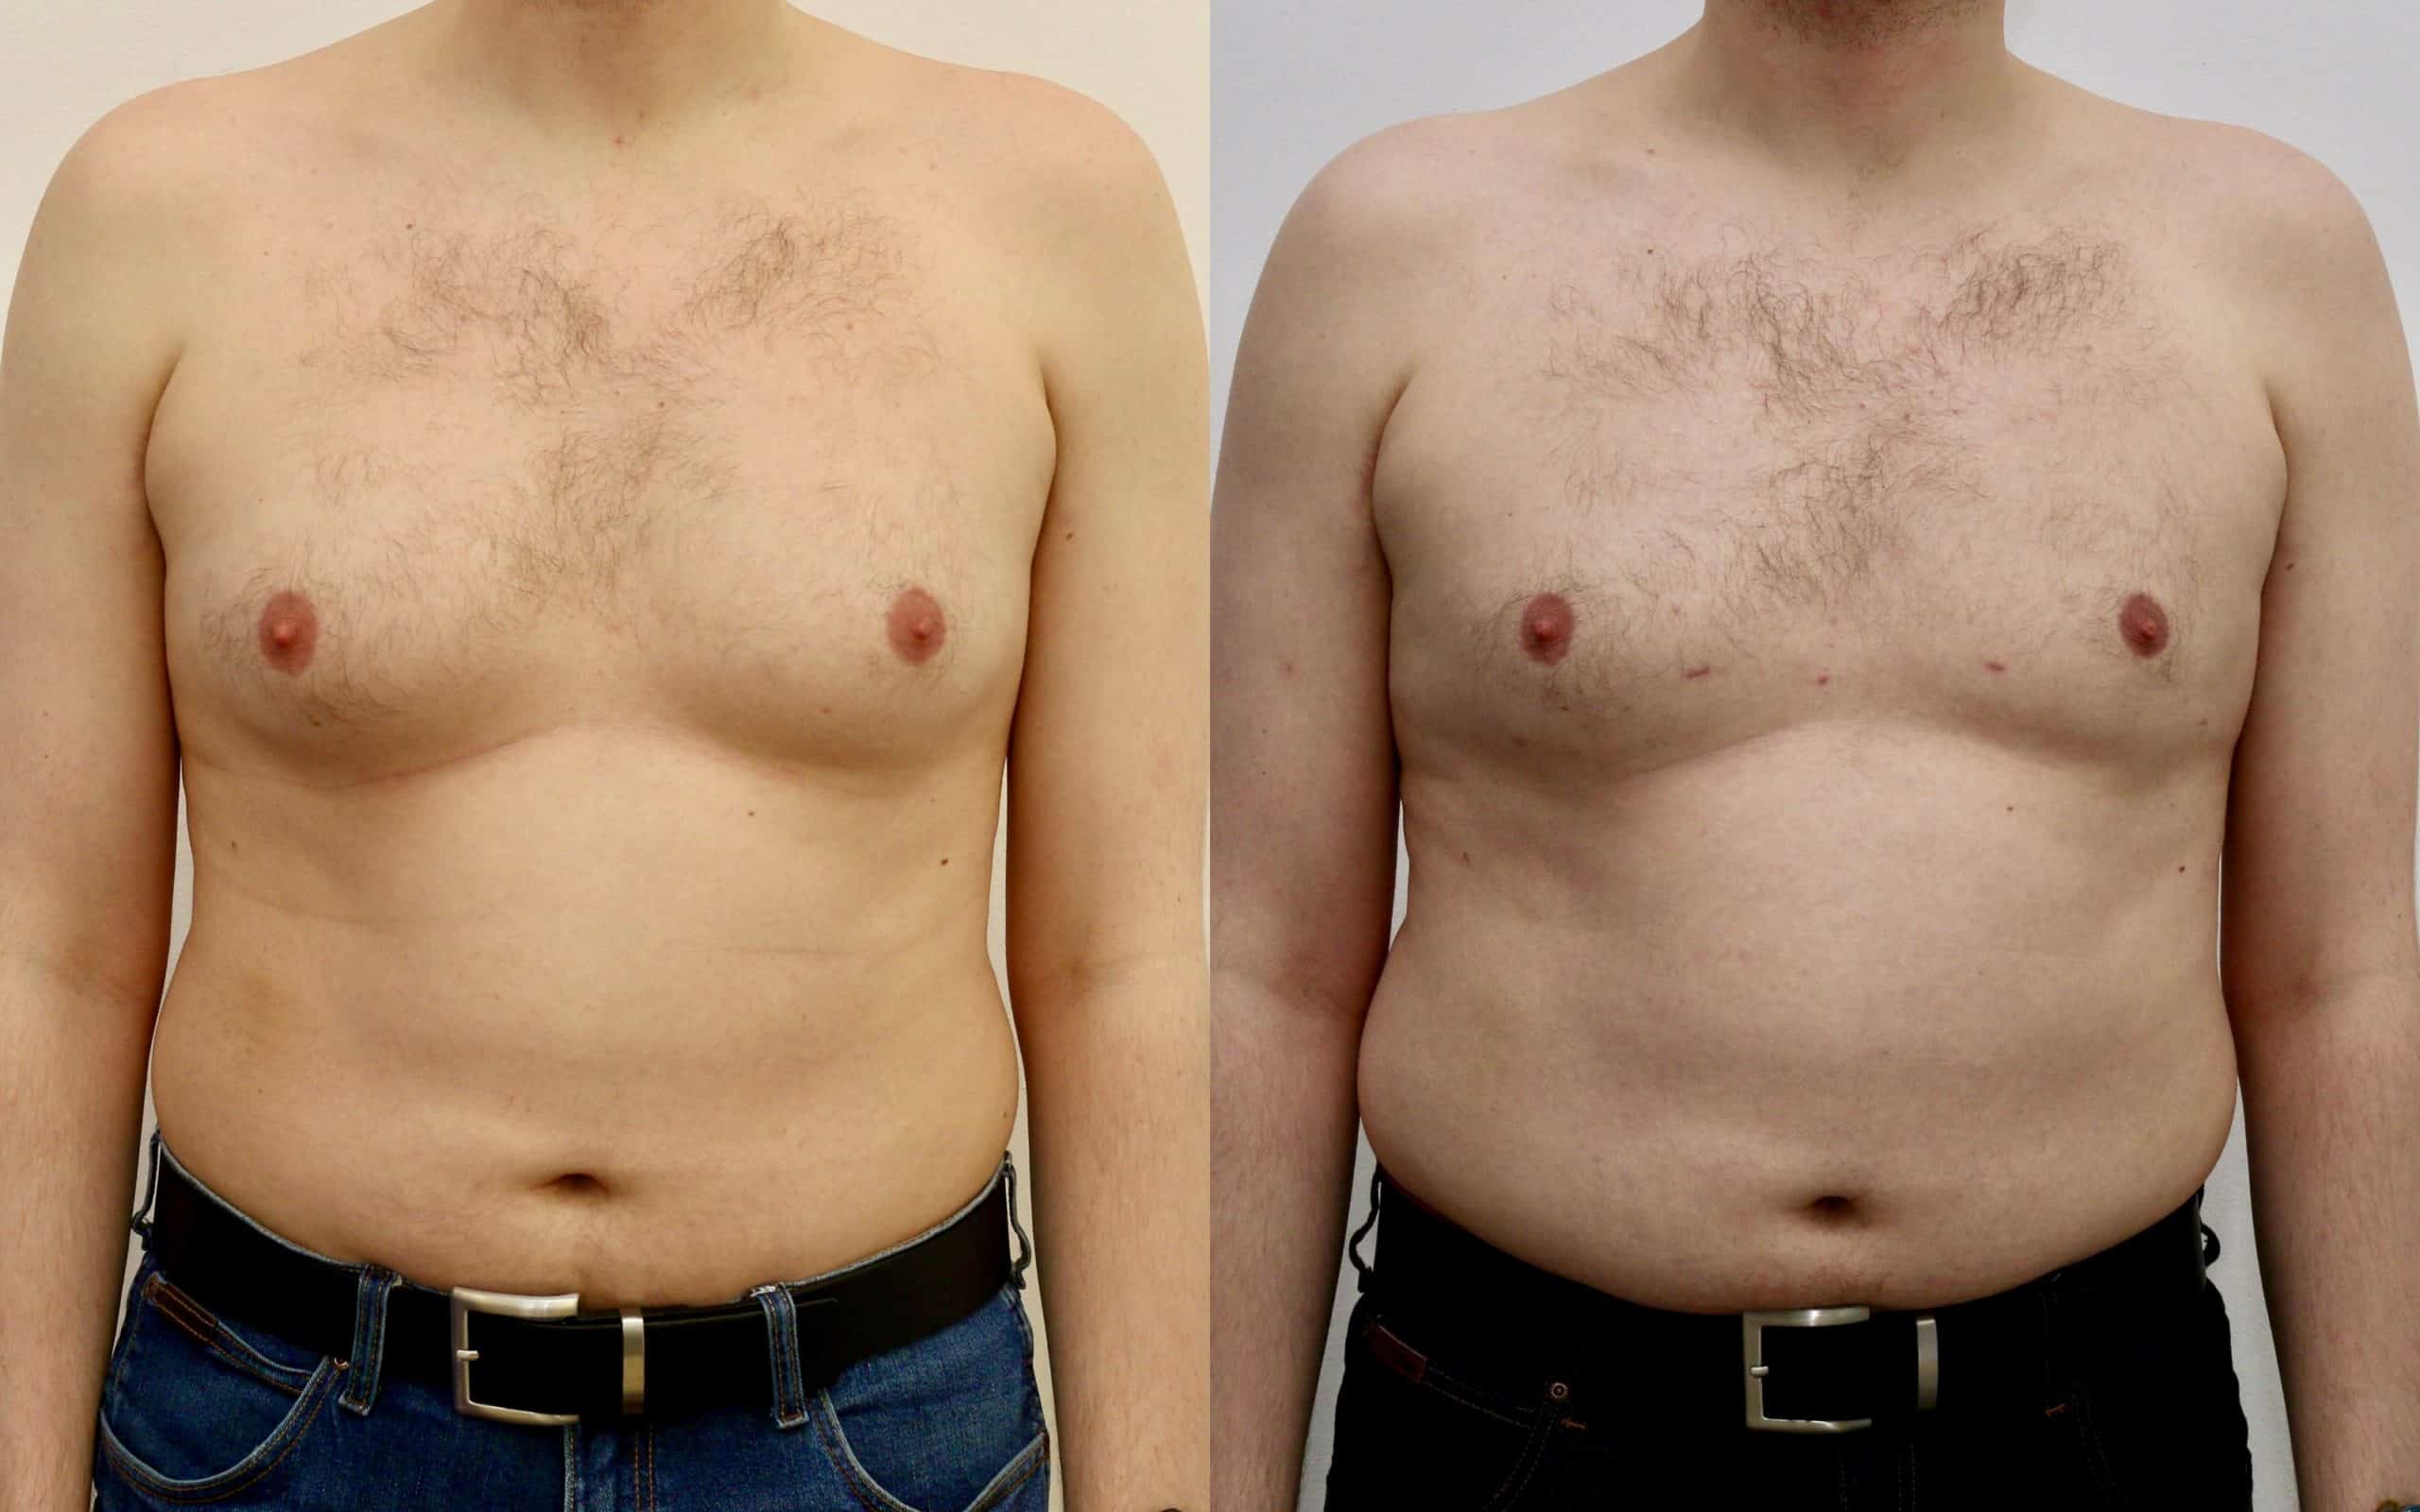 Gynecomastia liposuction before and after